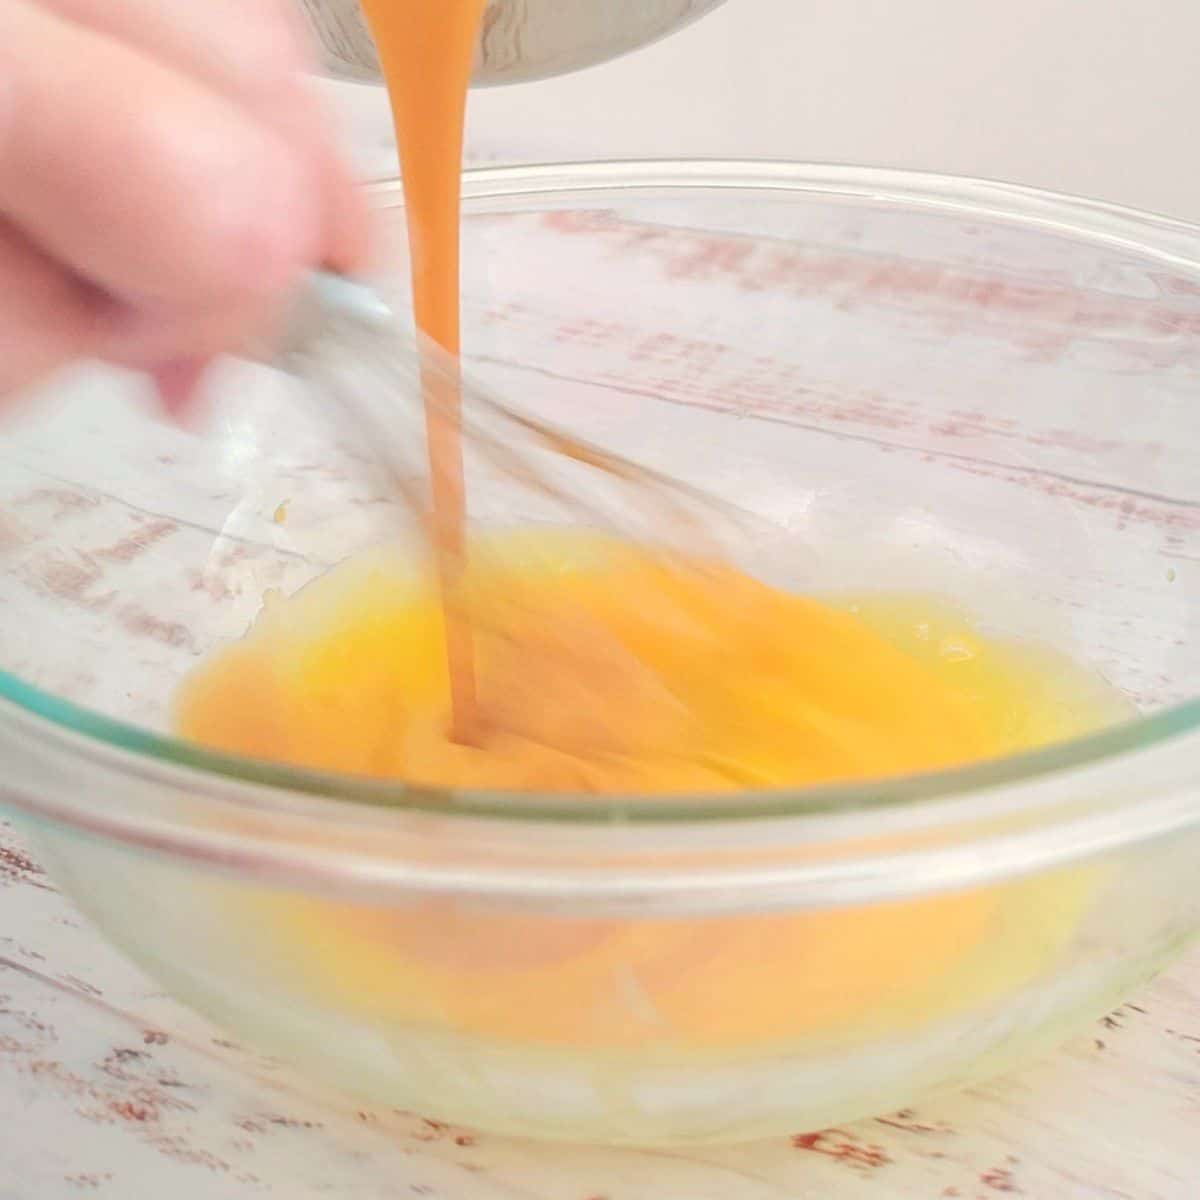 tempering eggs with caramel sauce